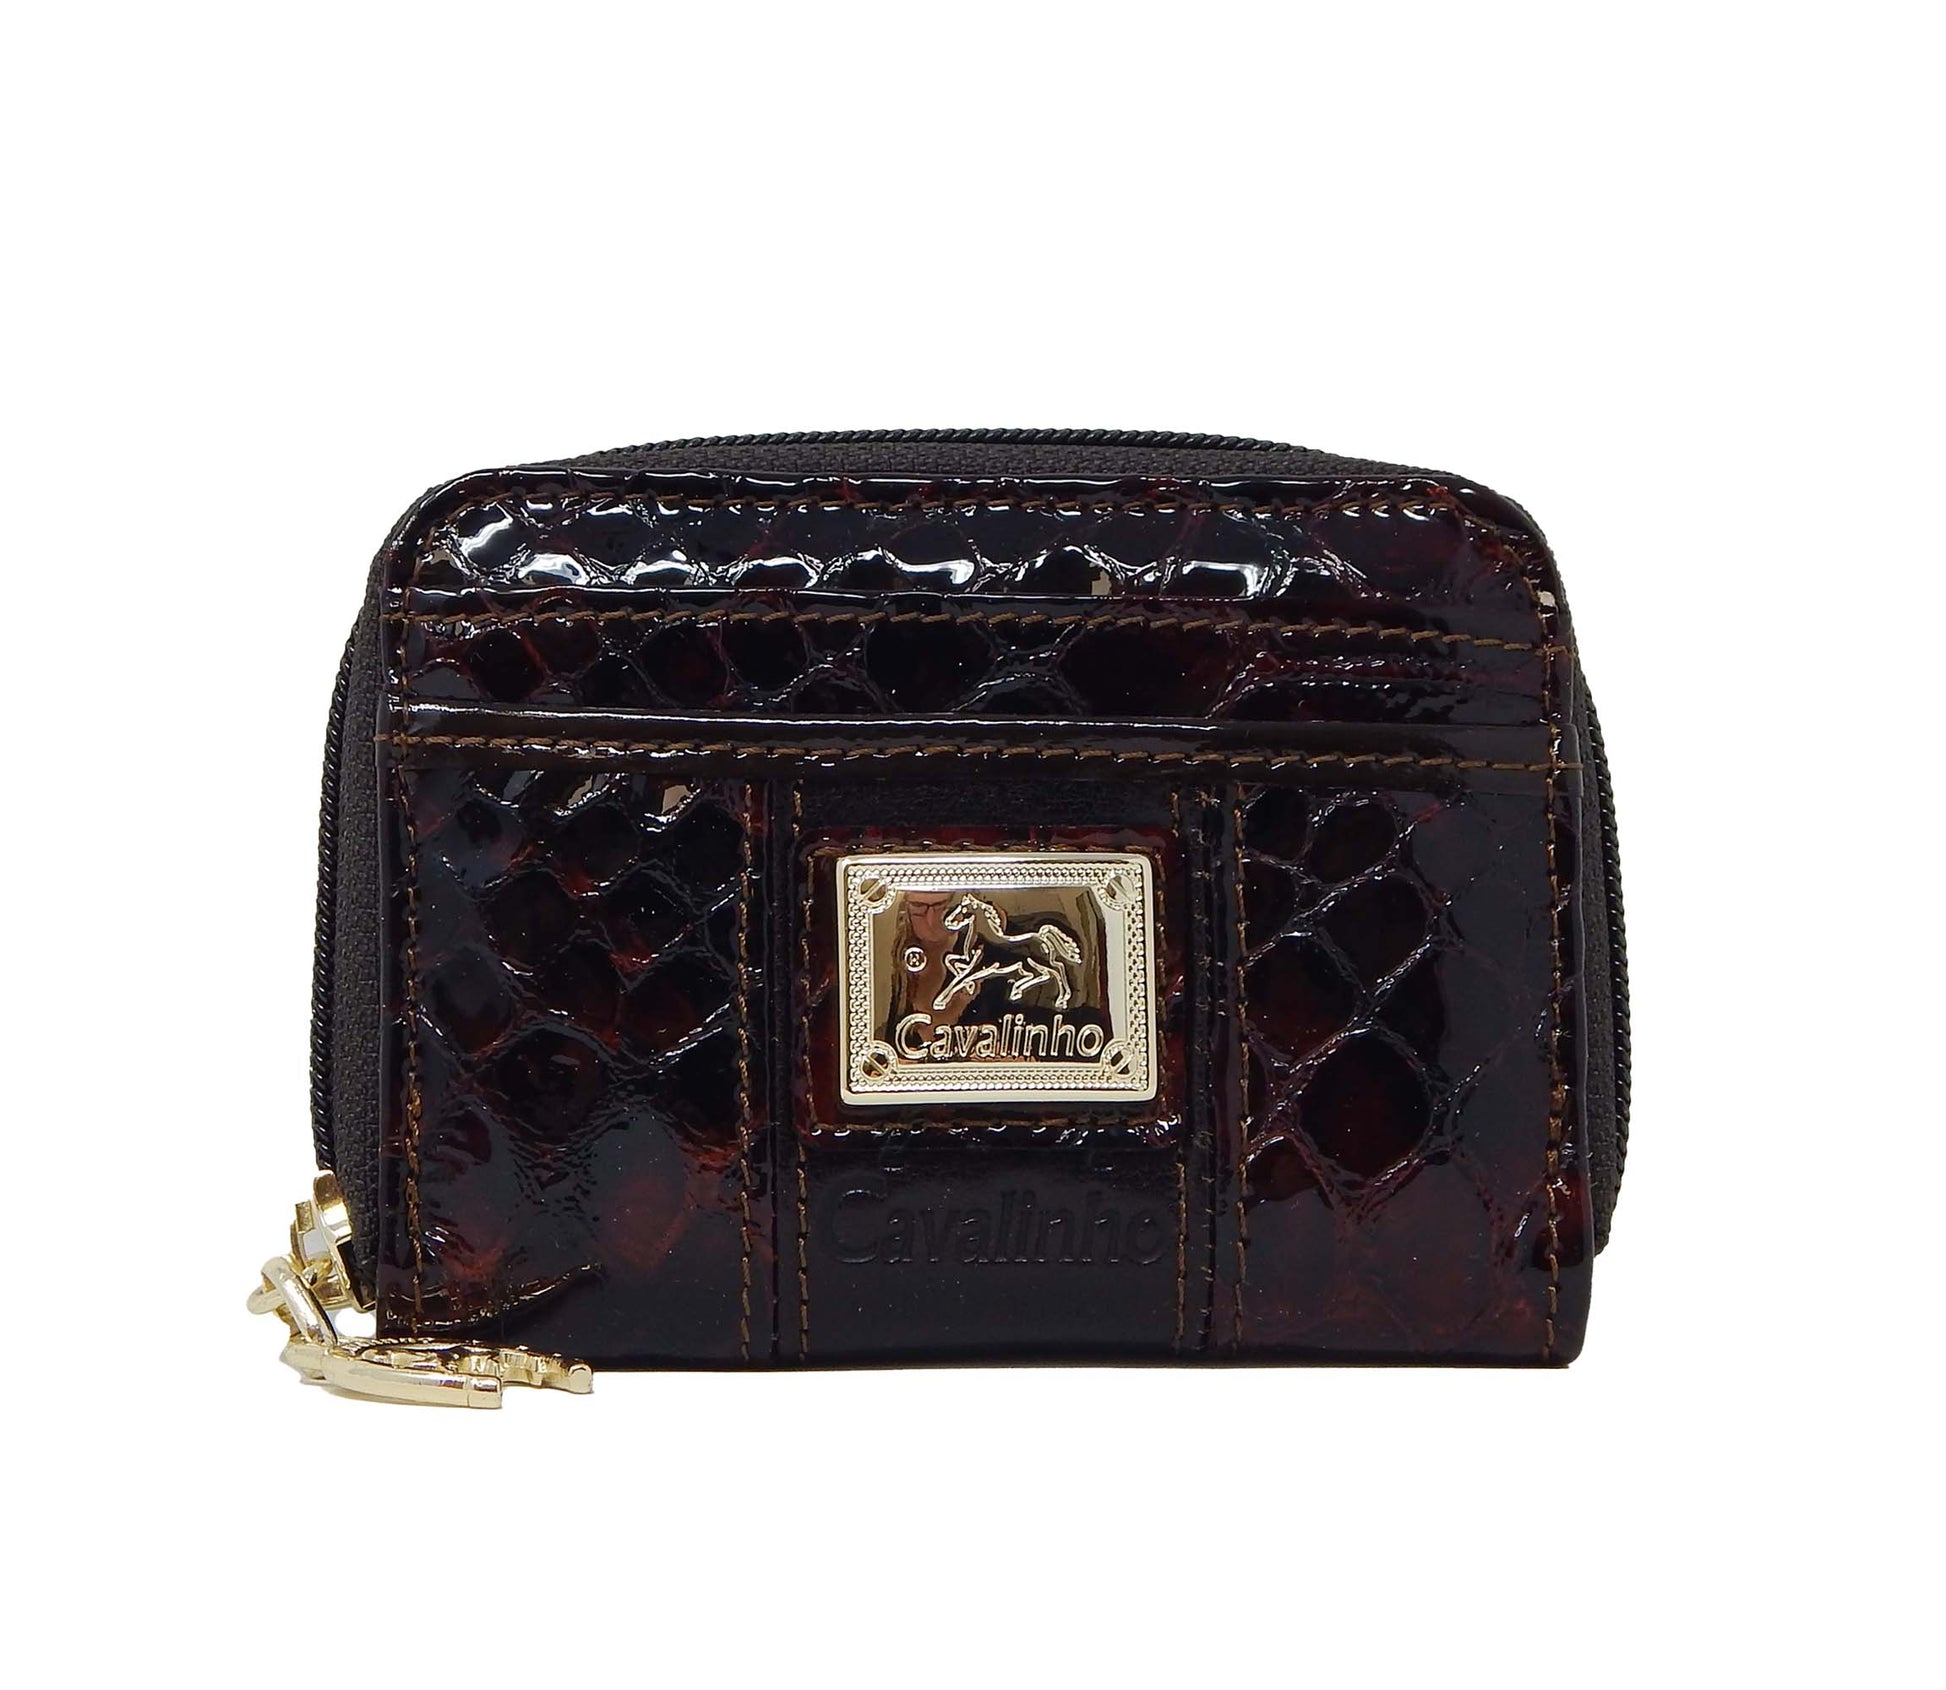 Cavalinho Honor Patent Leather Card Holder - Brown - 28190275.02.99_1